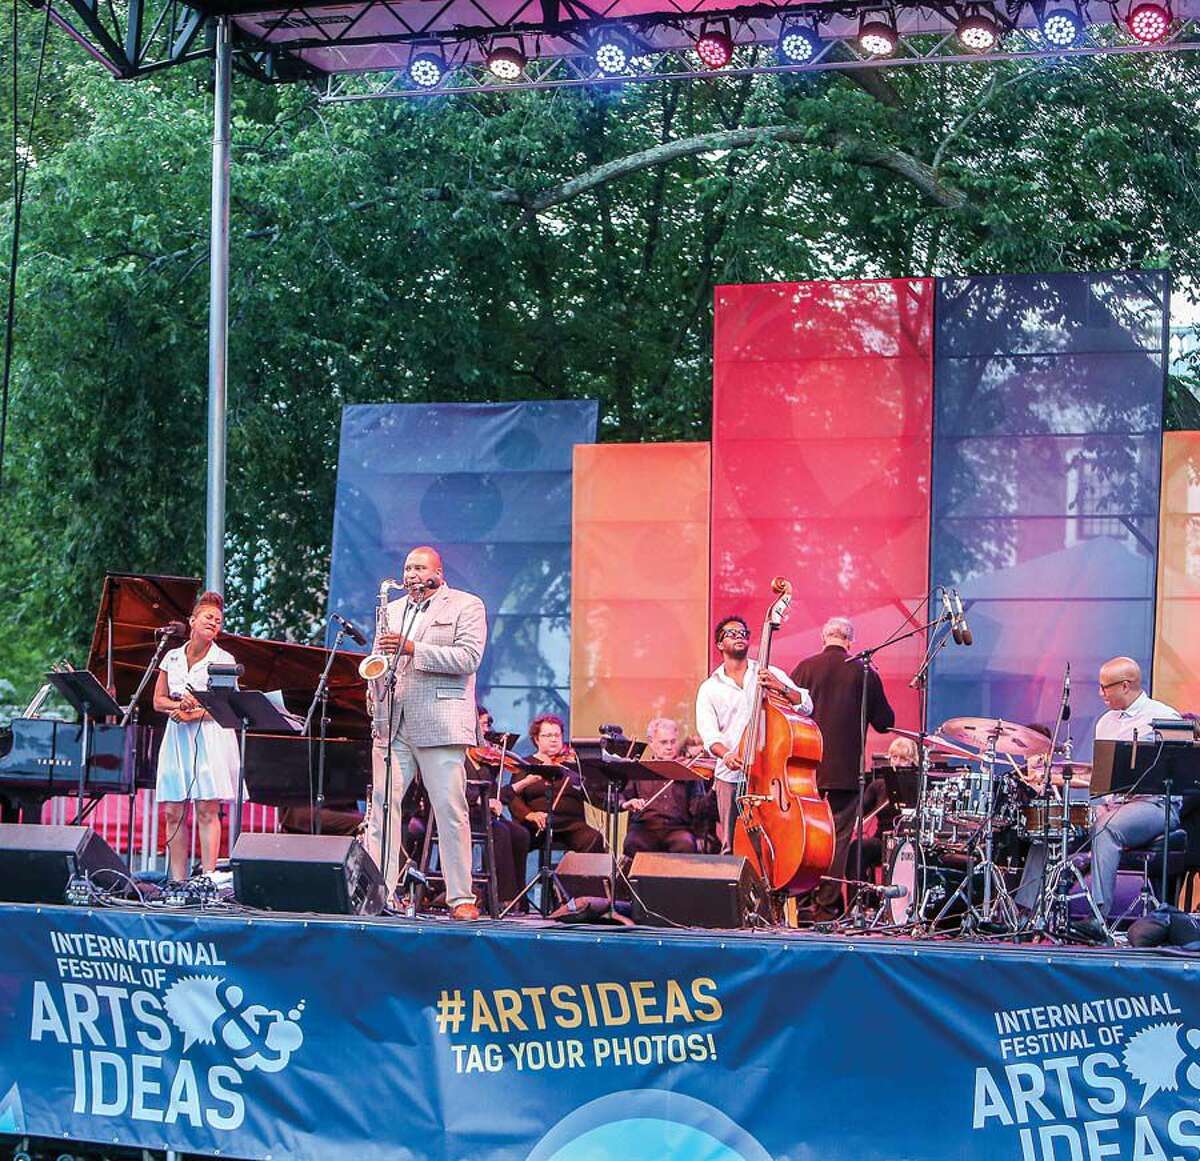 New Haven's International Festival of Arts & Ideas takes place June 9-23, 2018.